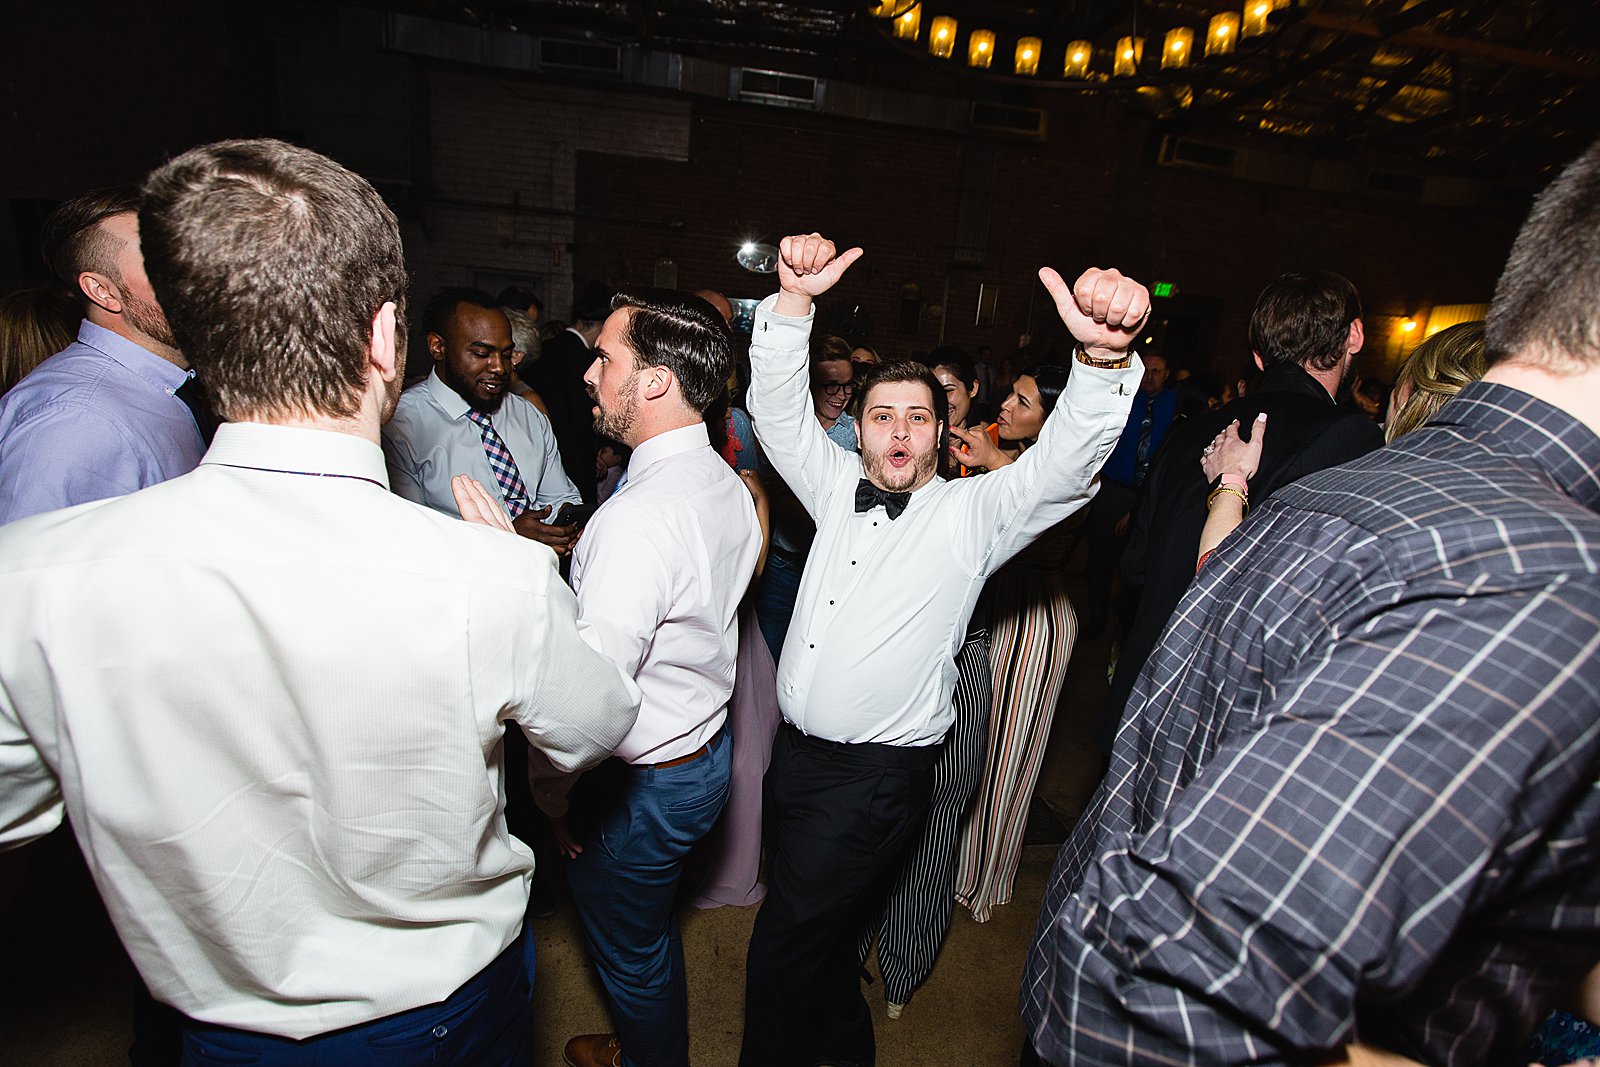 Guests dancing at The Ice House wedding reception by Phoenix wedding photographer PMA Photography